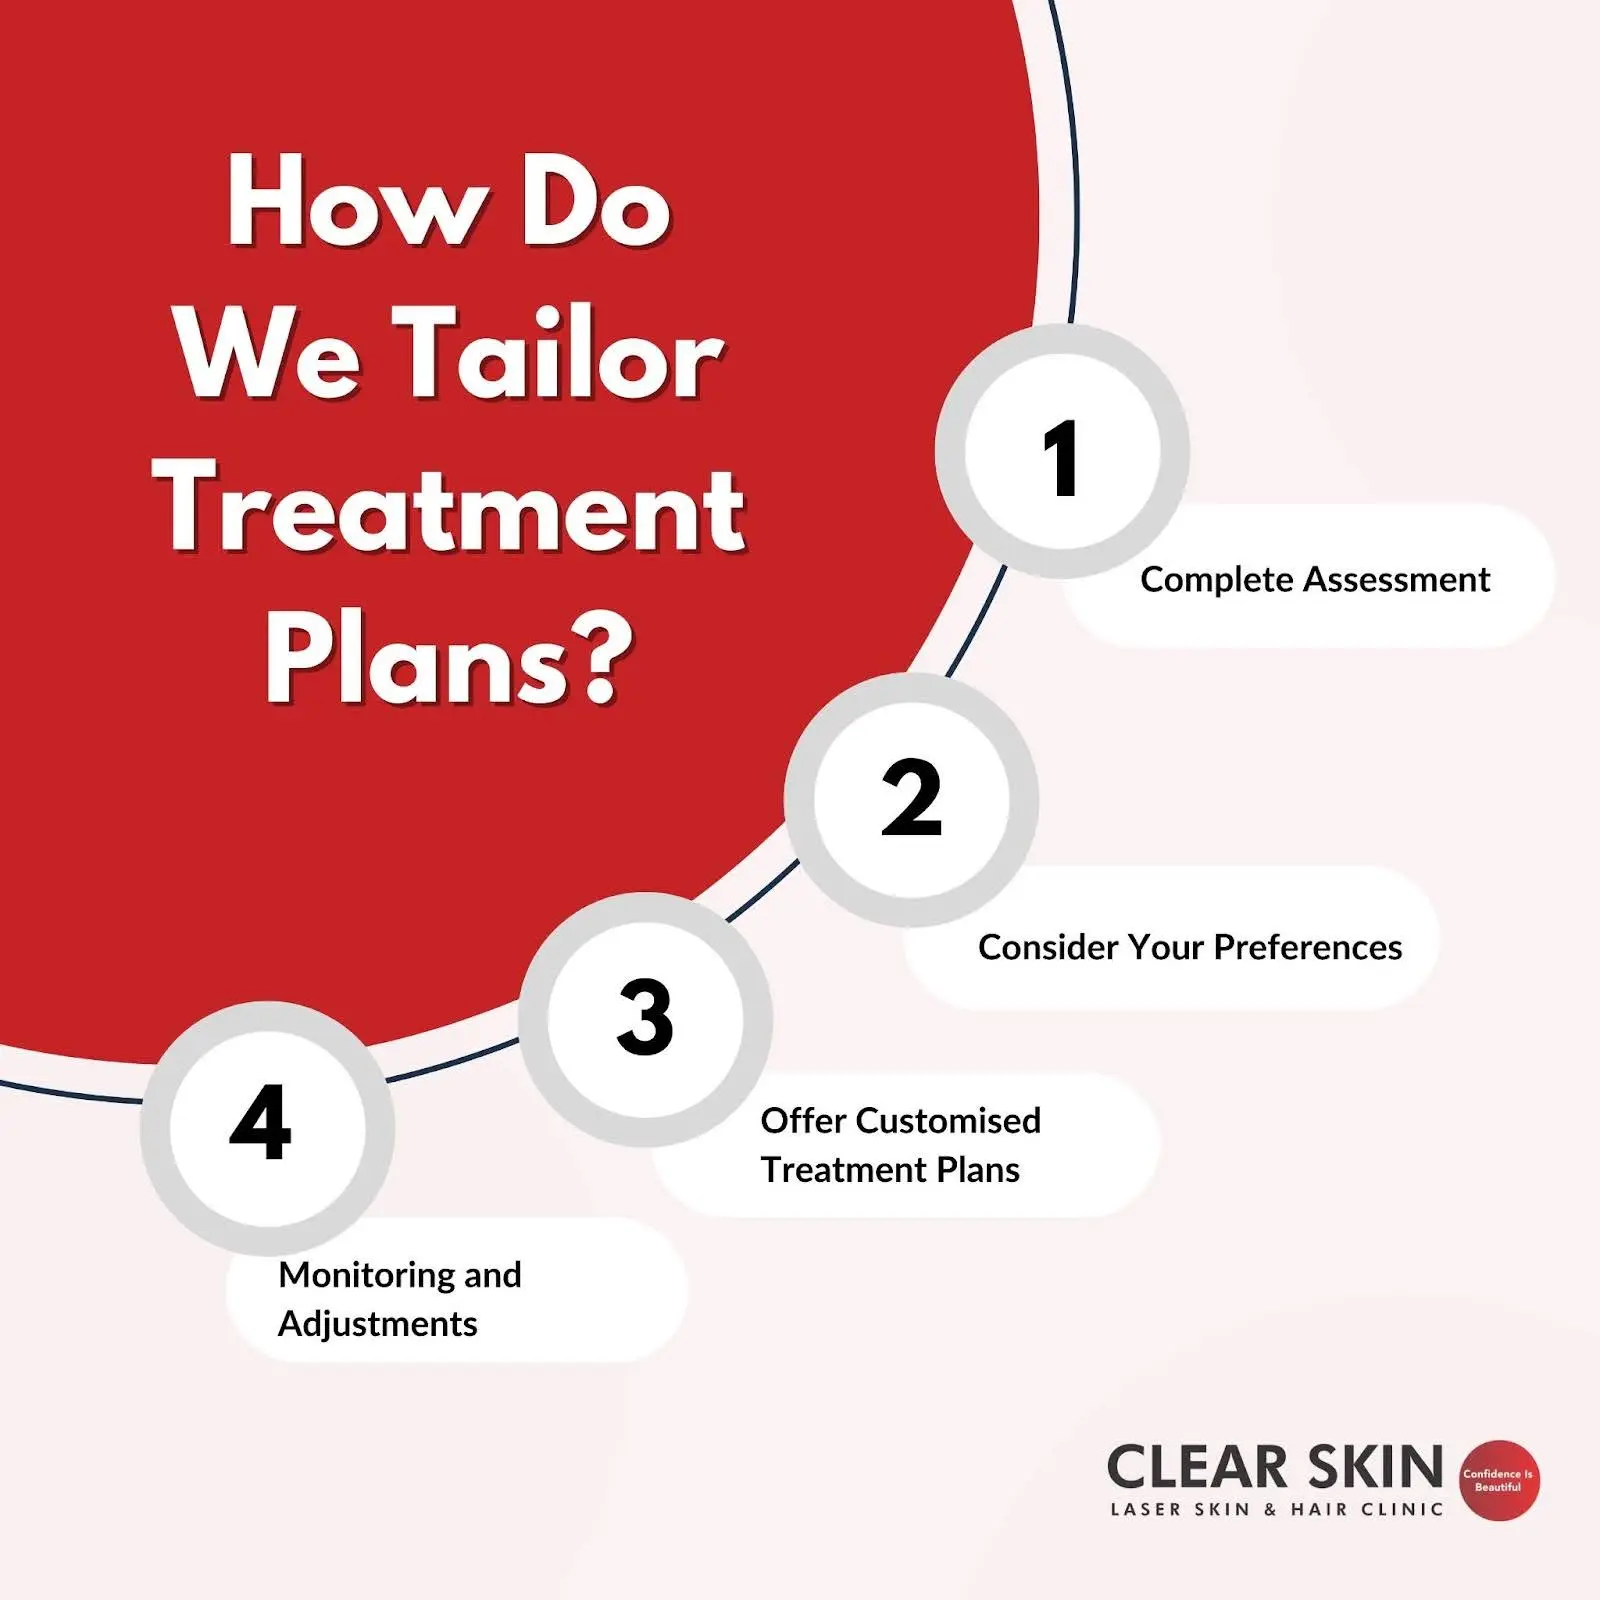 Customized Treatment Plans for Acne Scars